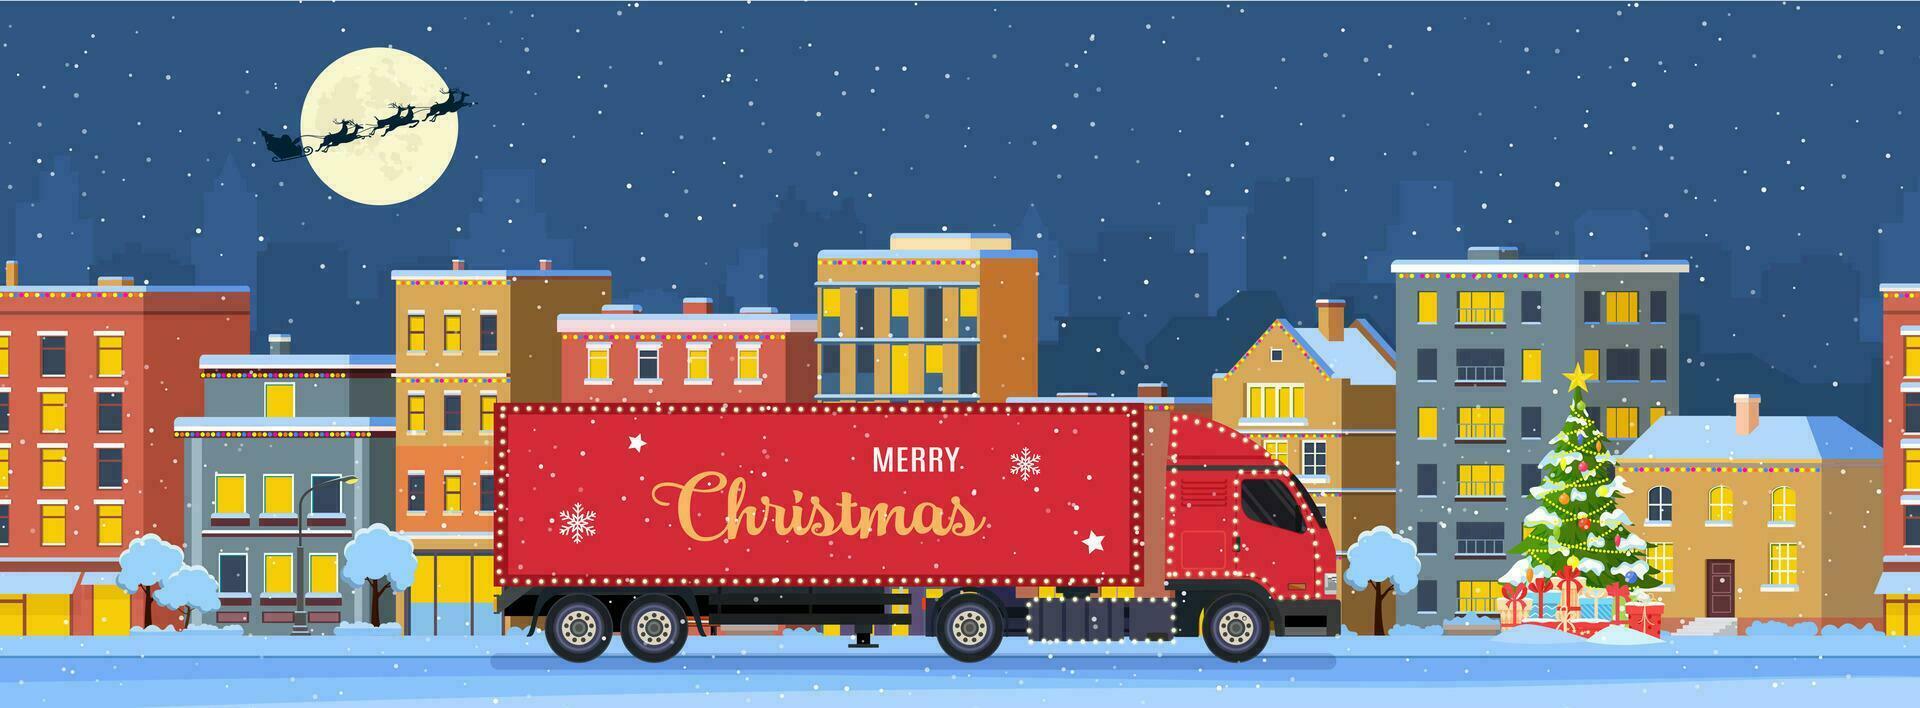 happy new year and merry Christmas winter town street in the night. christmas town city panorama. Santa Claus with deers in sky above the city. red delivery truck on background . Vector illustration